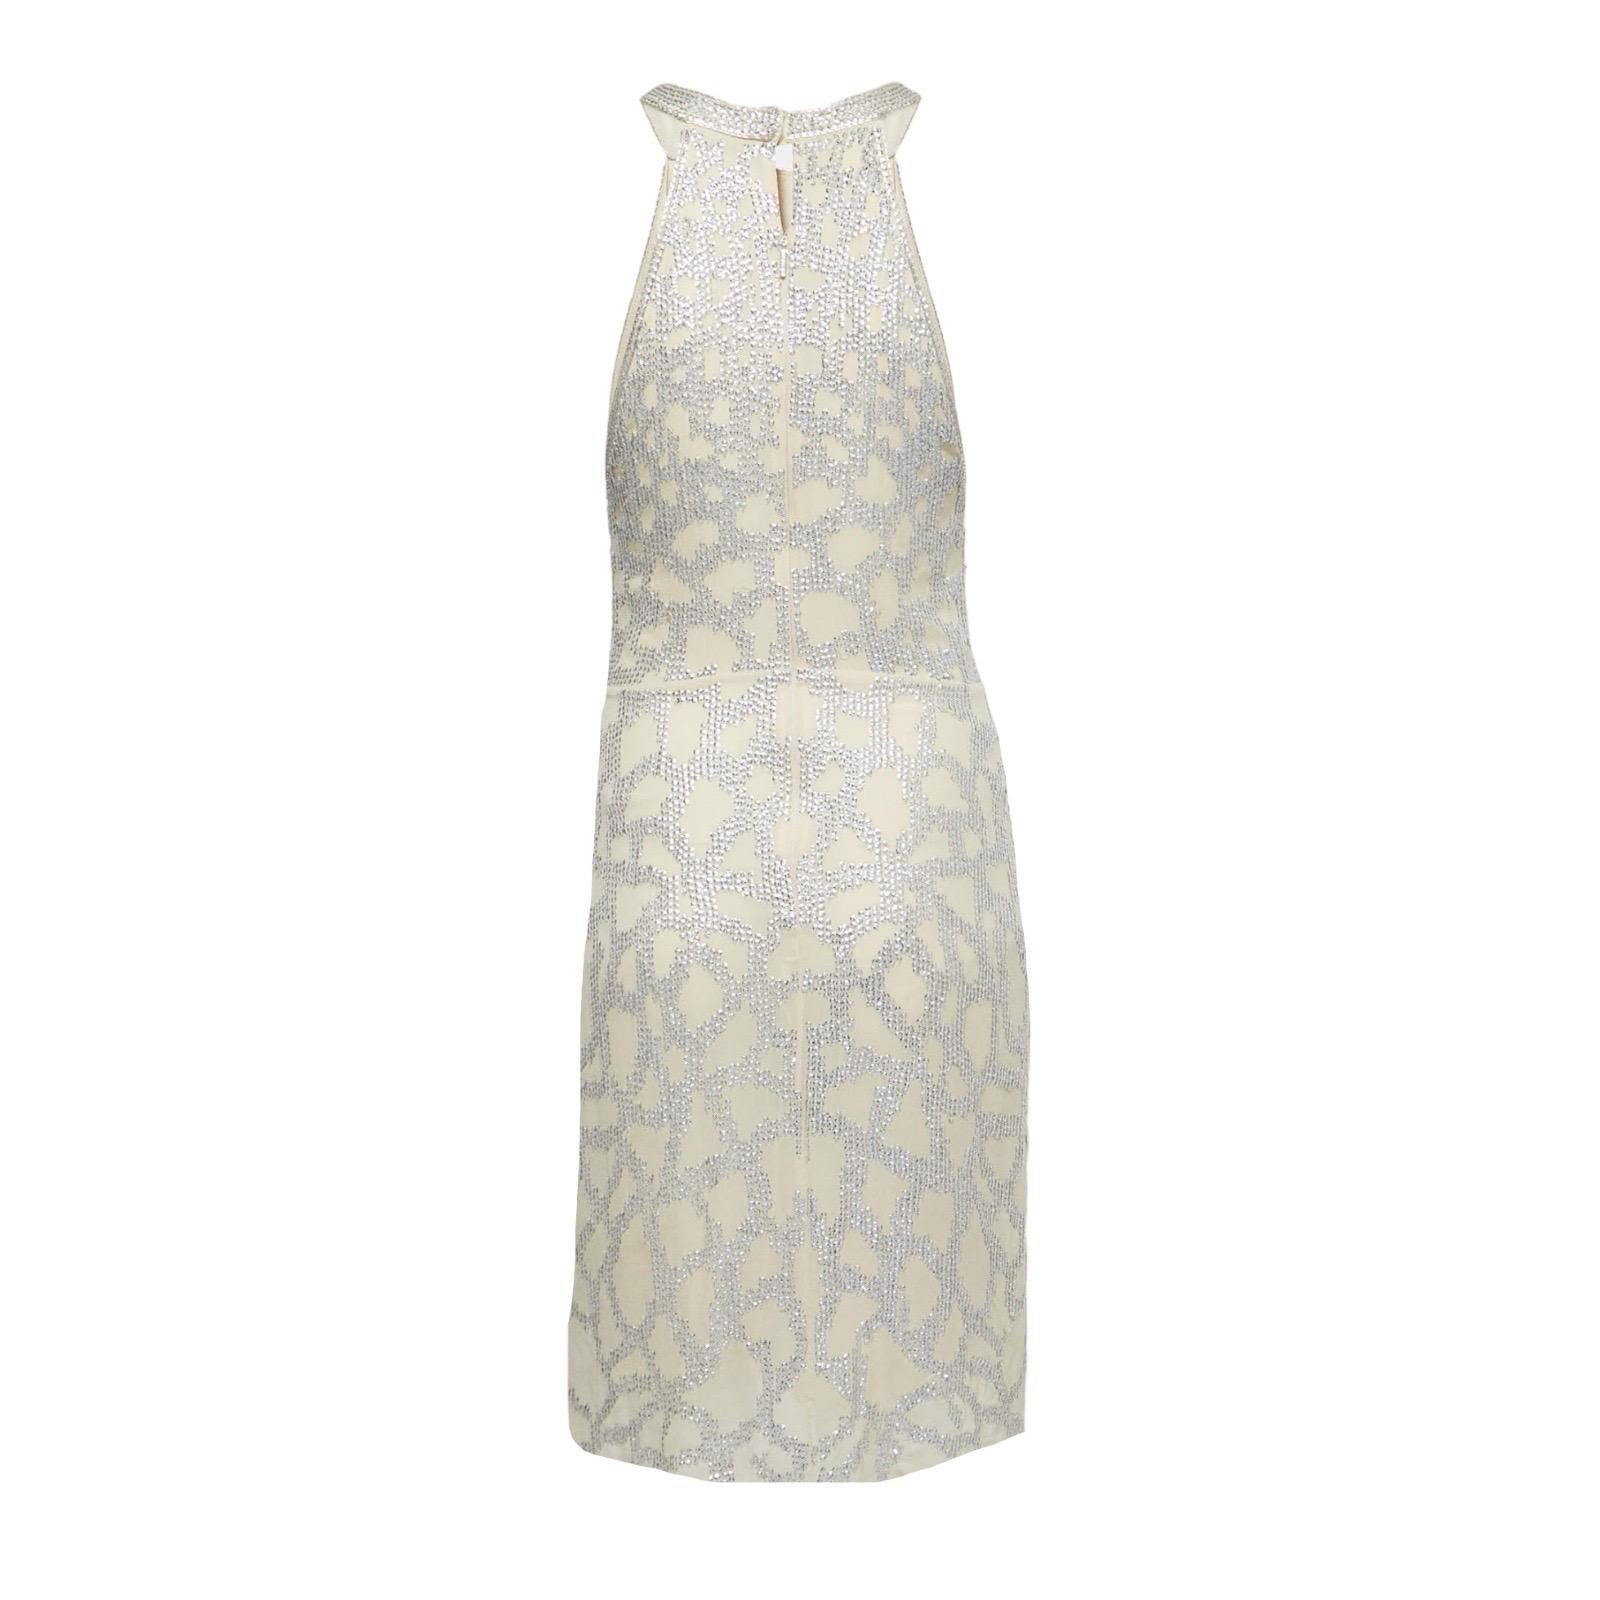 Head-turning dress by Roberto Cavalli
Wonderful silk embroidered with sequins
Zipper signed „Roberto Cavalli“
Peek-a-boo neckline 
Draped „knot“ detail in front 
Closes with zipper in back
Made in Italy
Dry Clean Only
Size 40